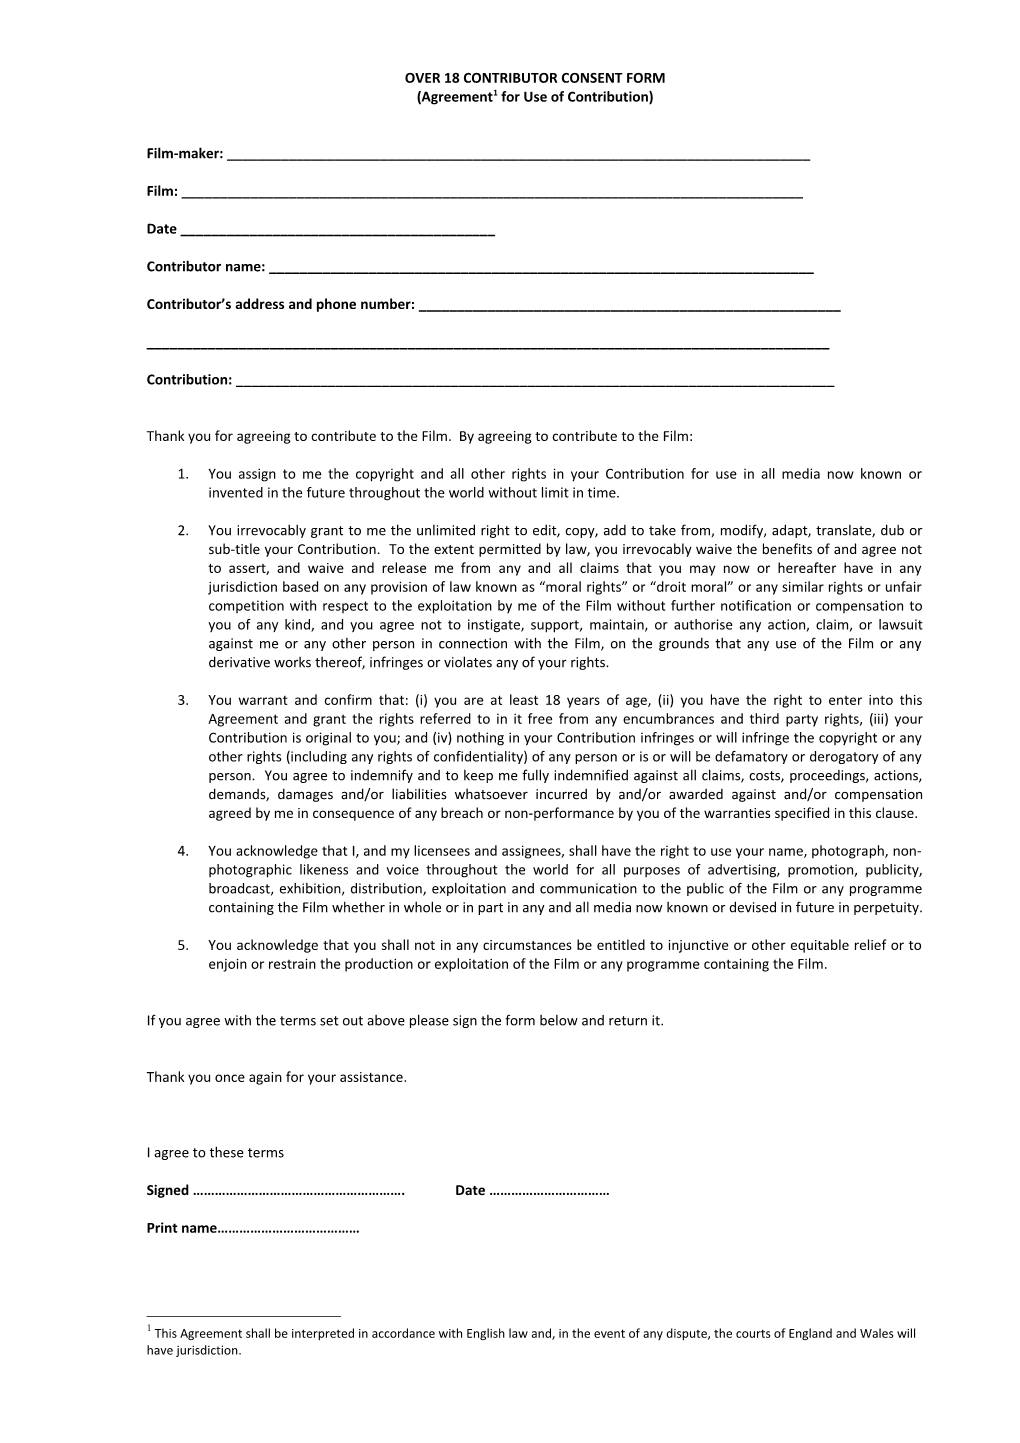 Standard Contributor Consent Form (With No Fee)